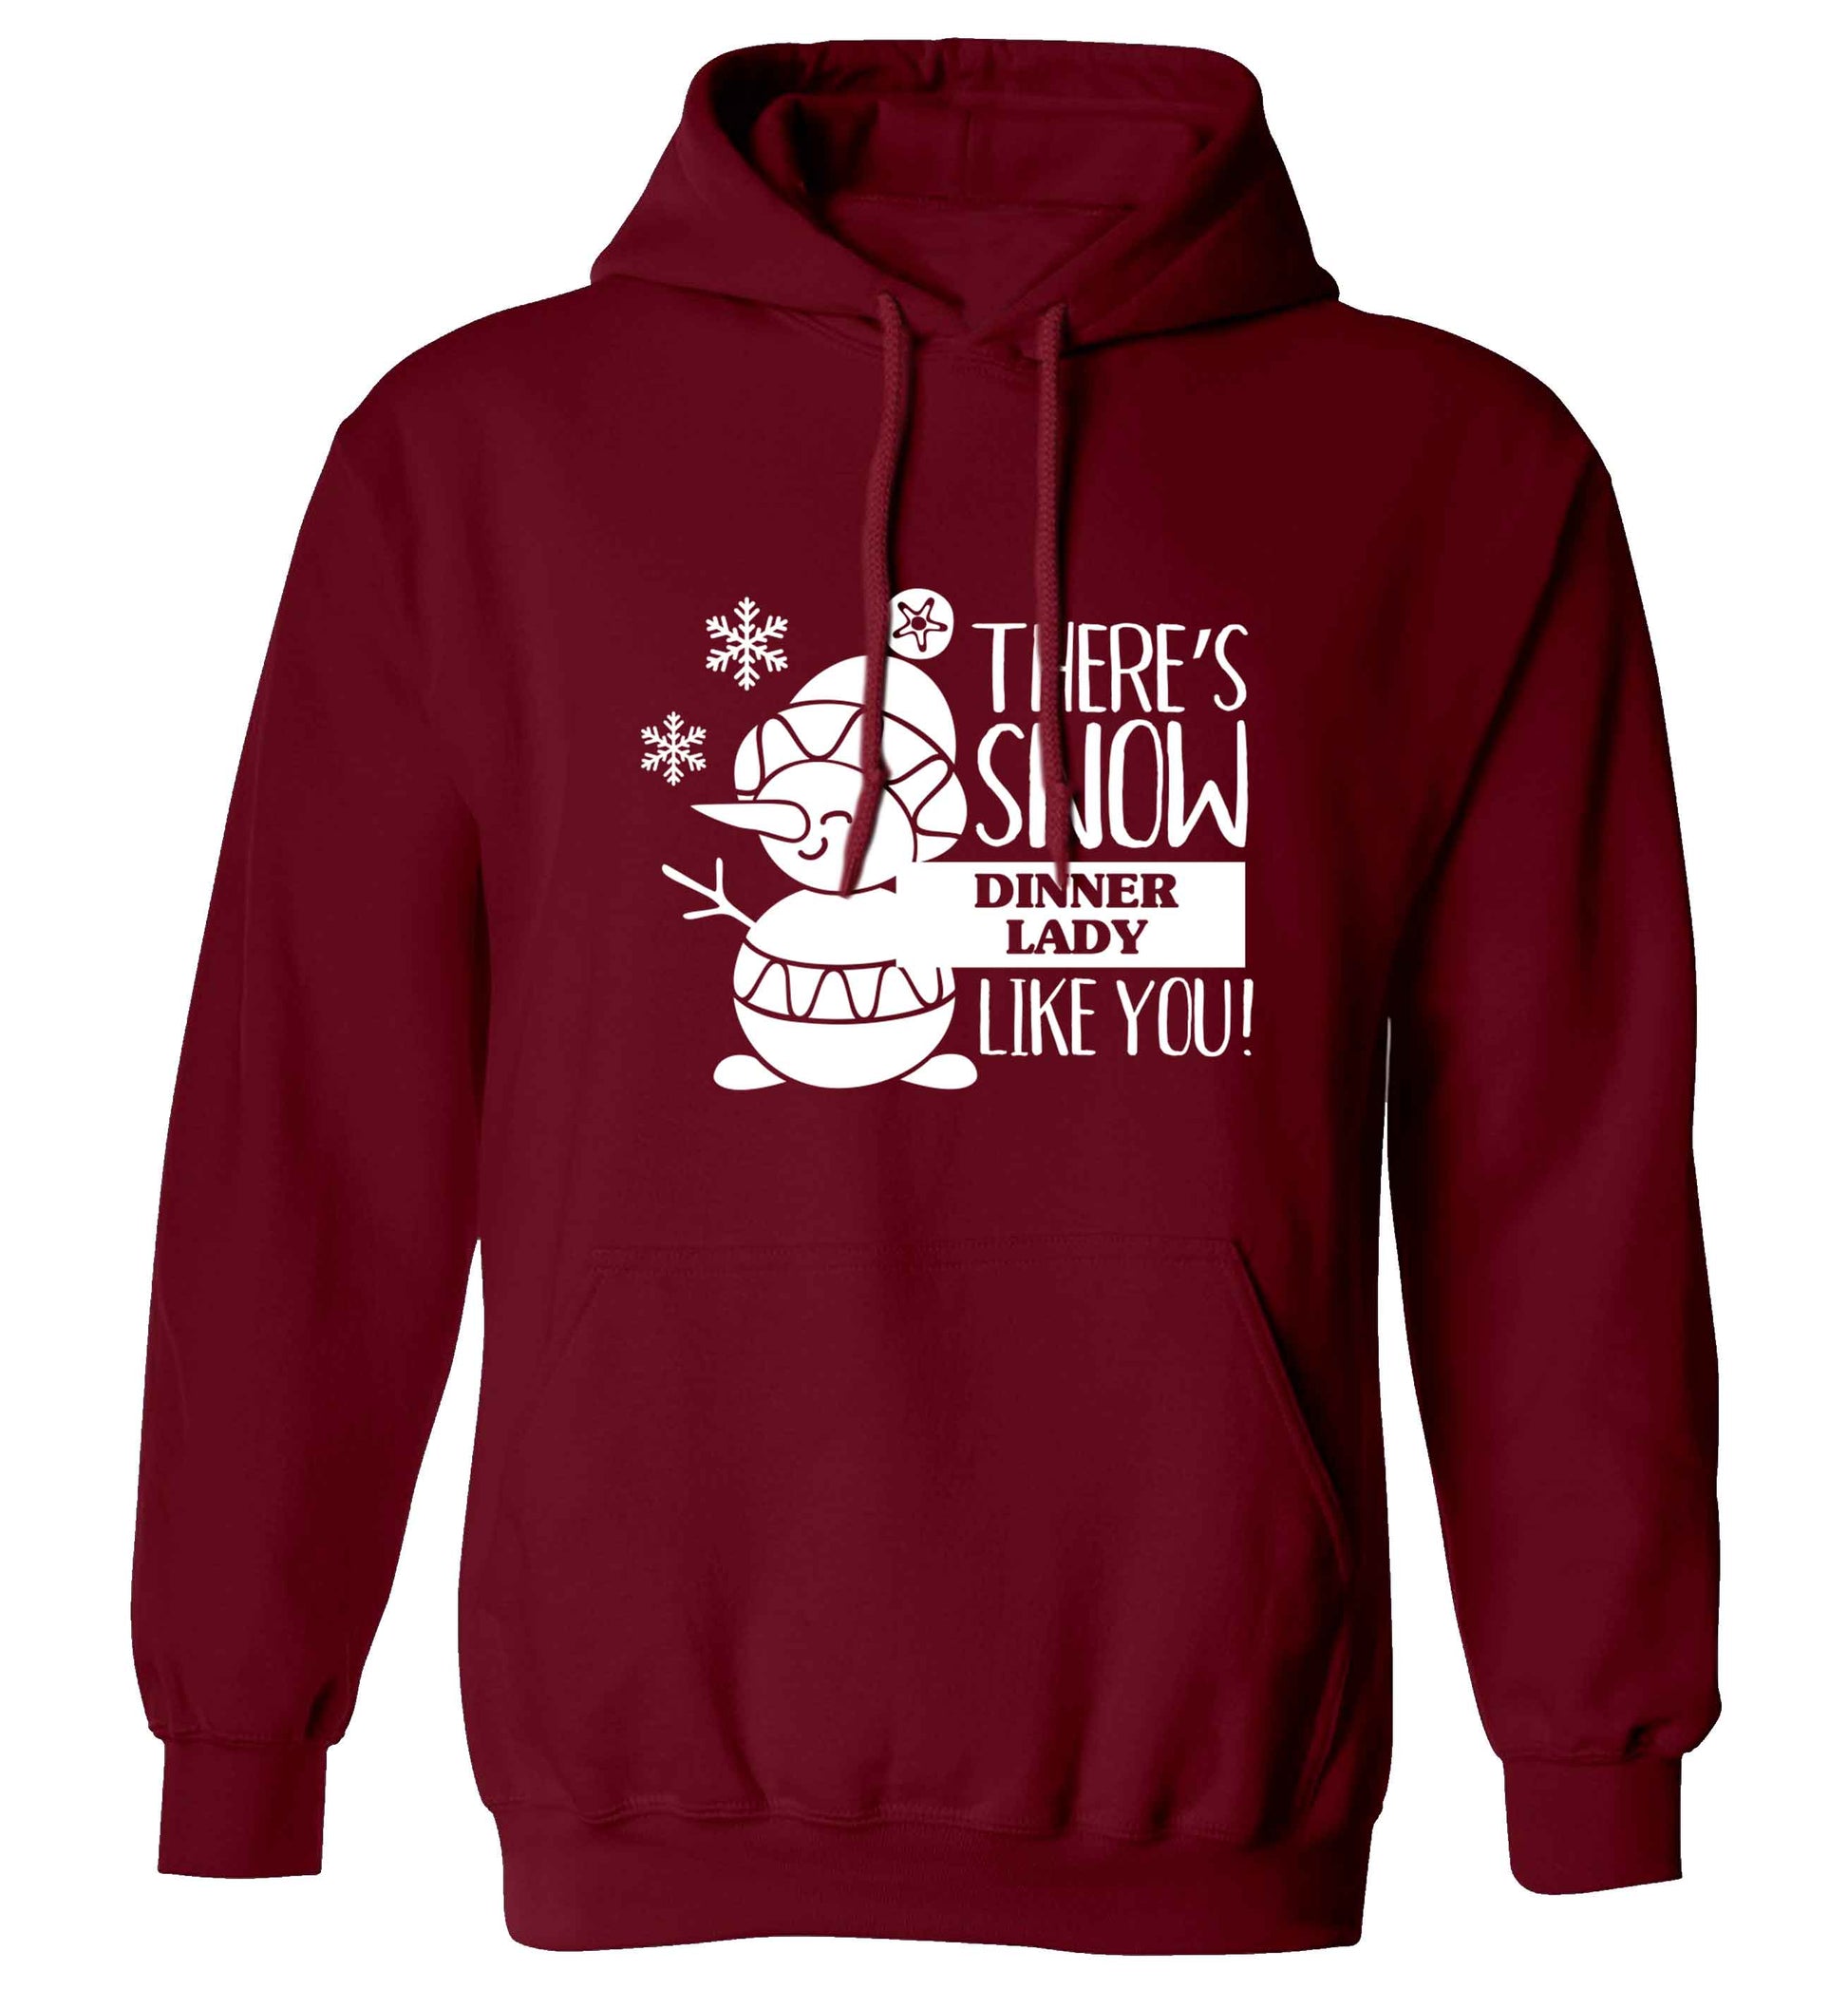 There's snow dinner lady like you adults unisex maroon hoodie 2XL